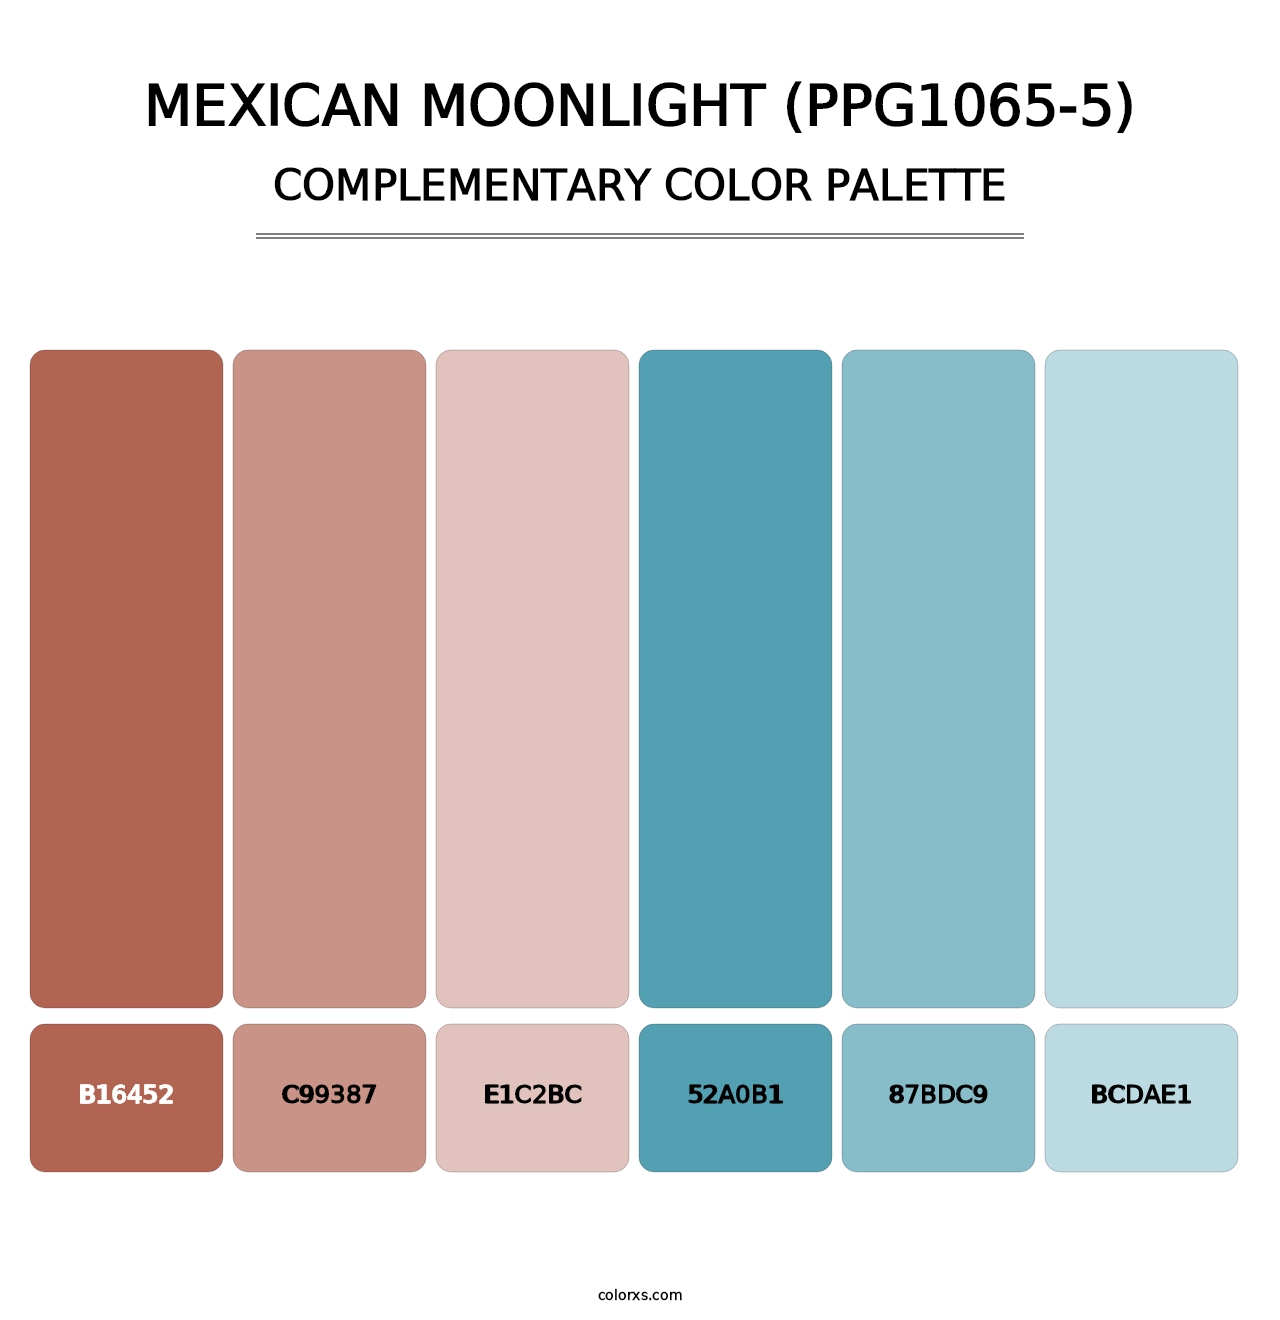 Mexican Moonlight (PPG1065-5) - Complementary Color Palette